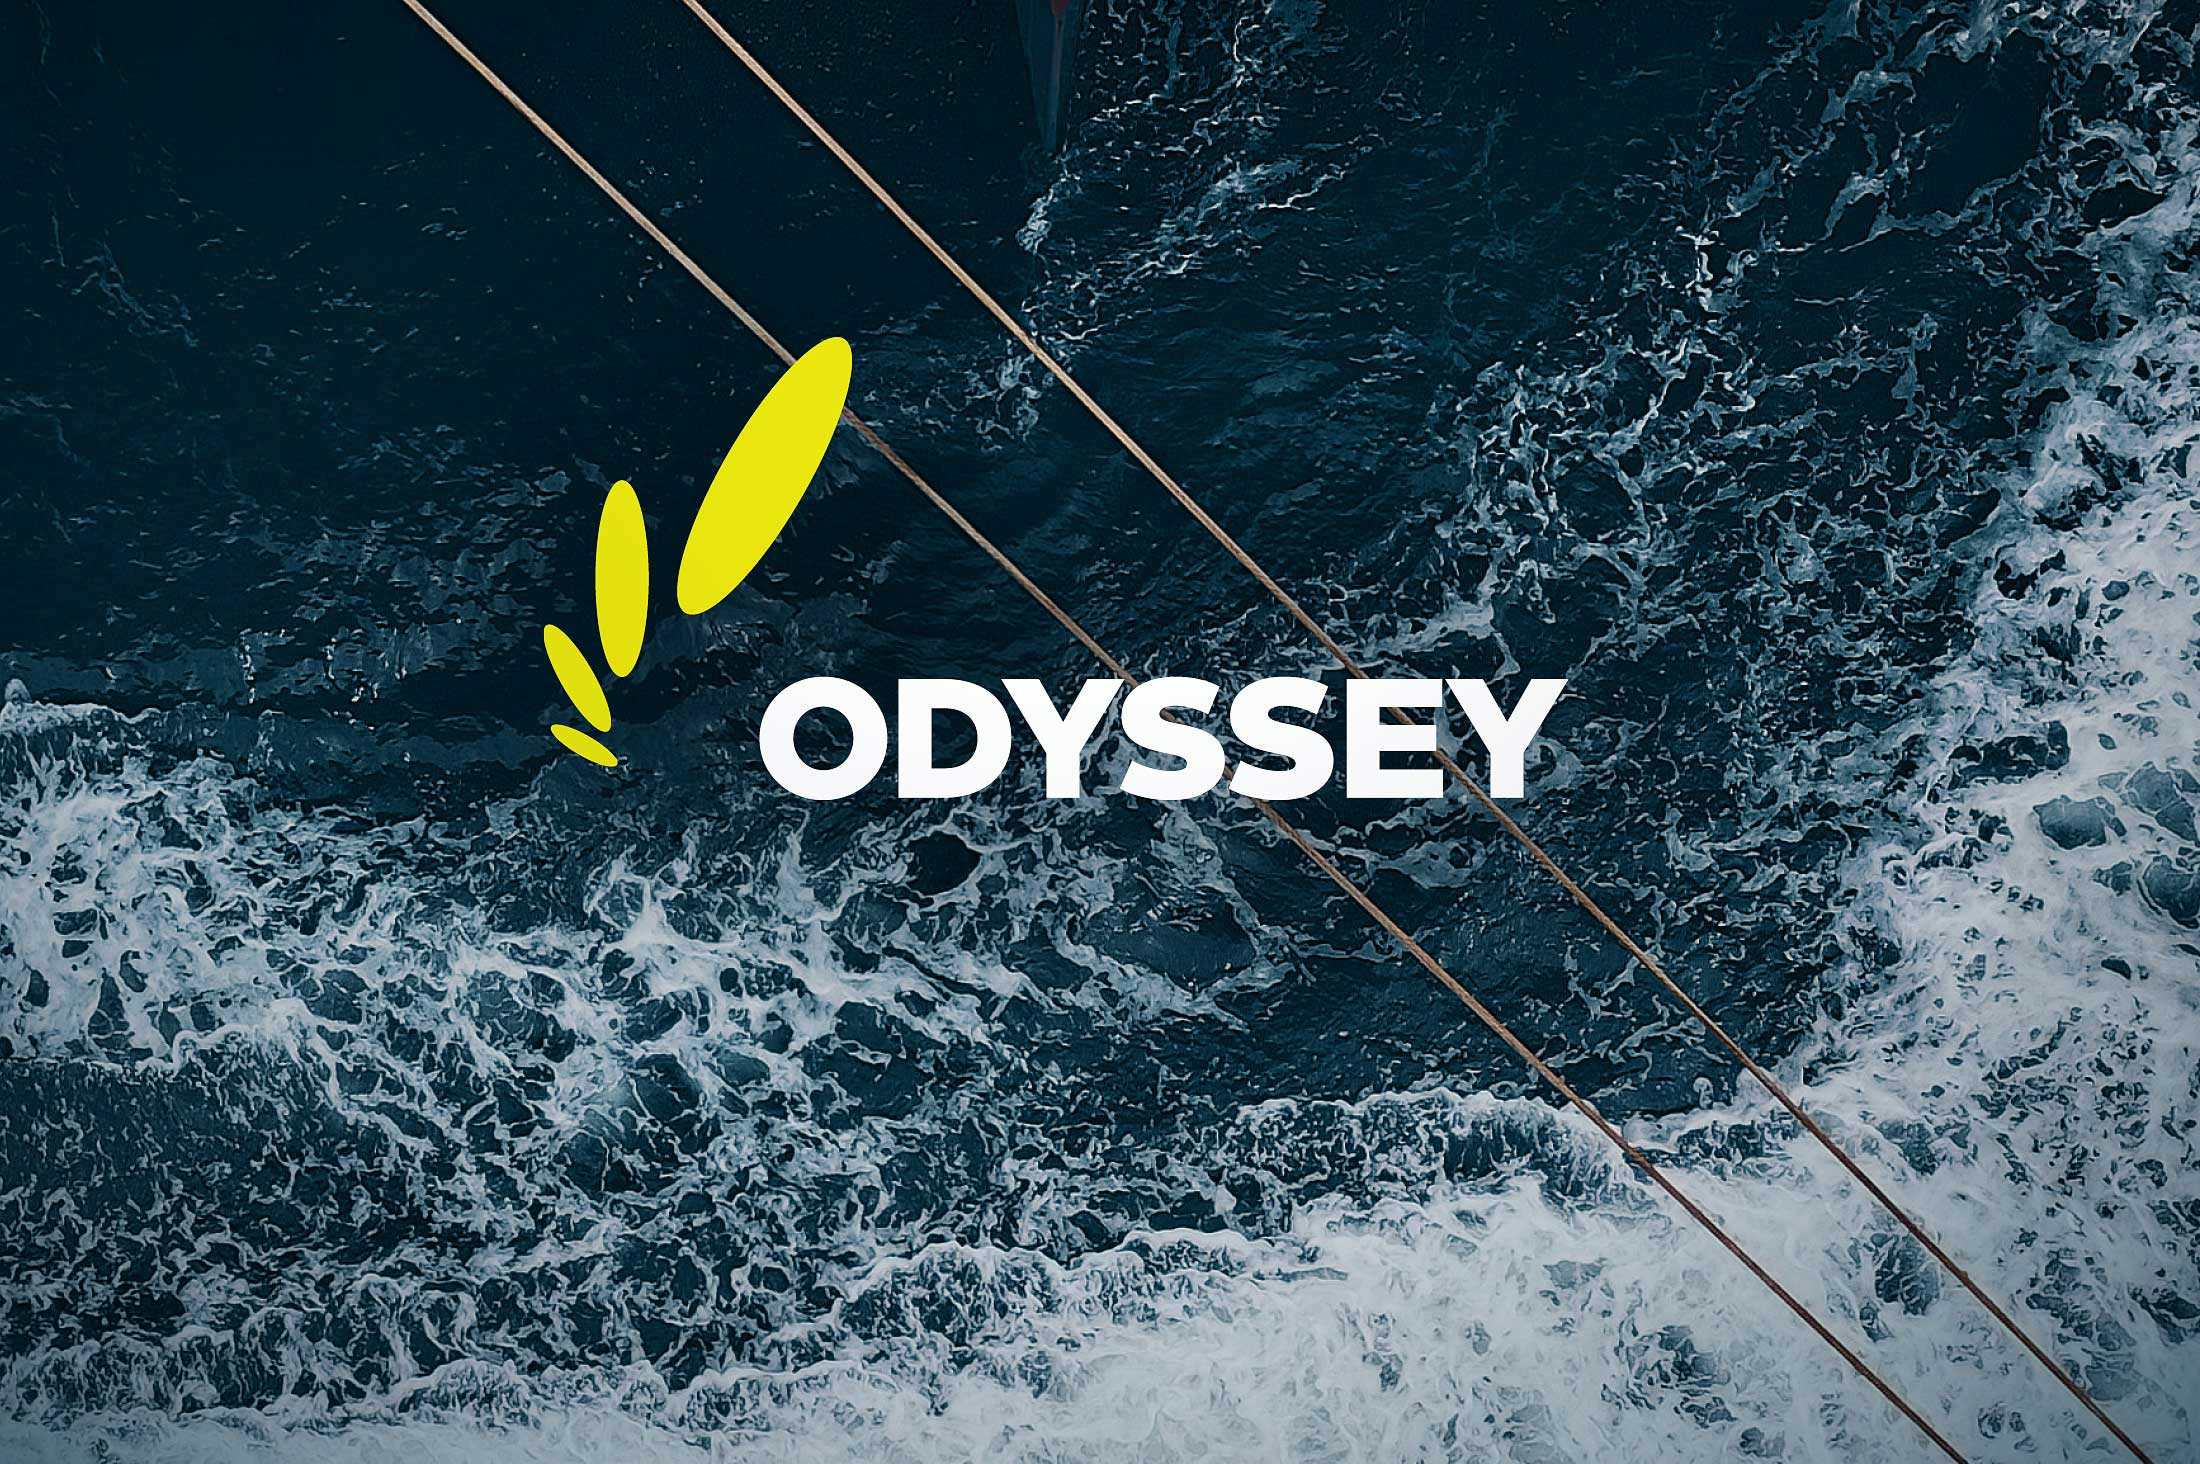 Dark blue ocean with waves seen from above, featuring the Odyssey logo positioned atop the image.